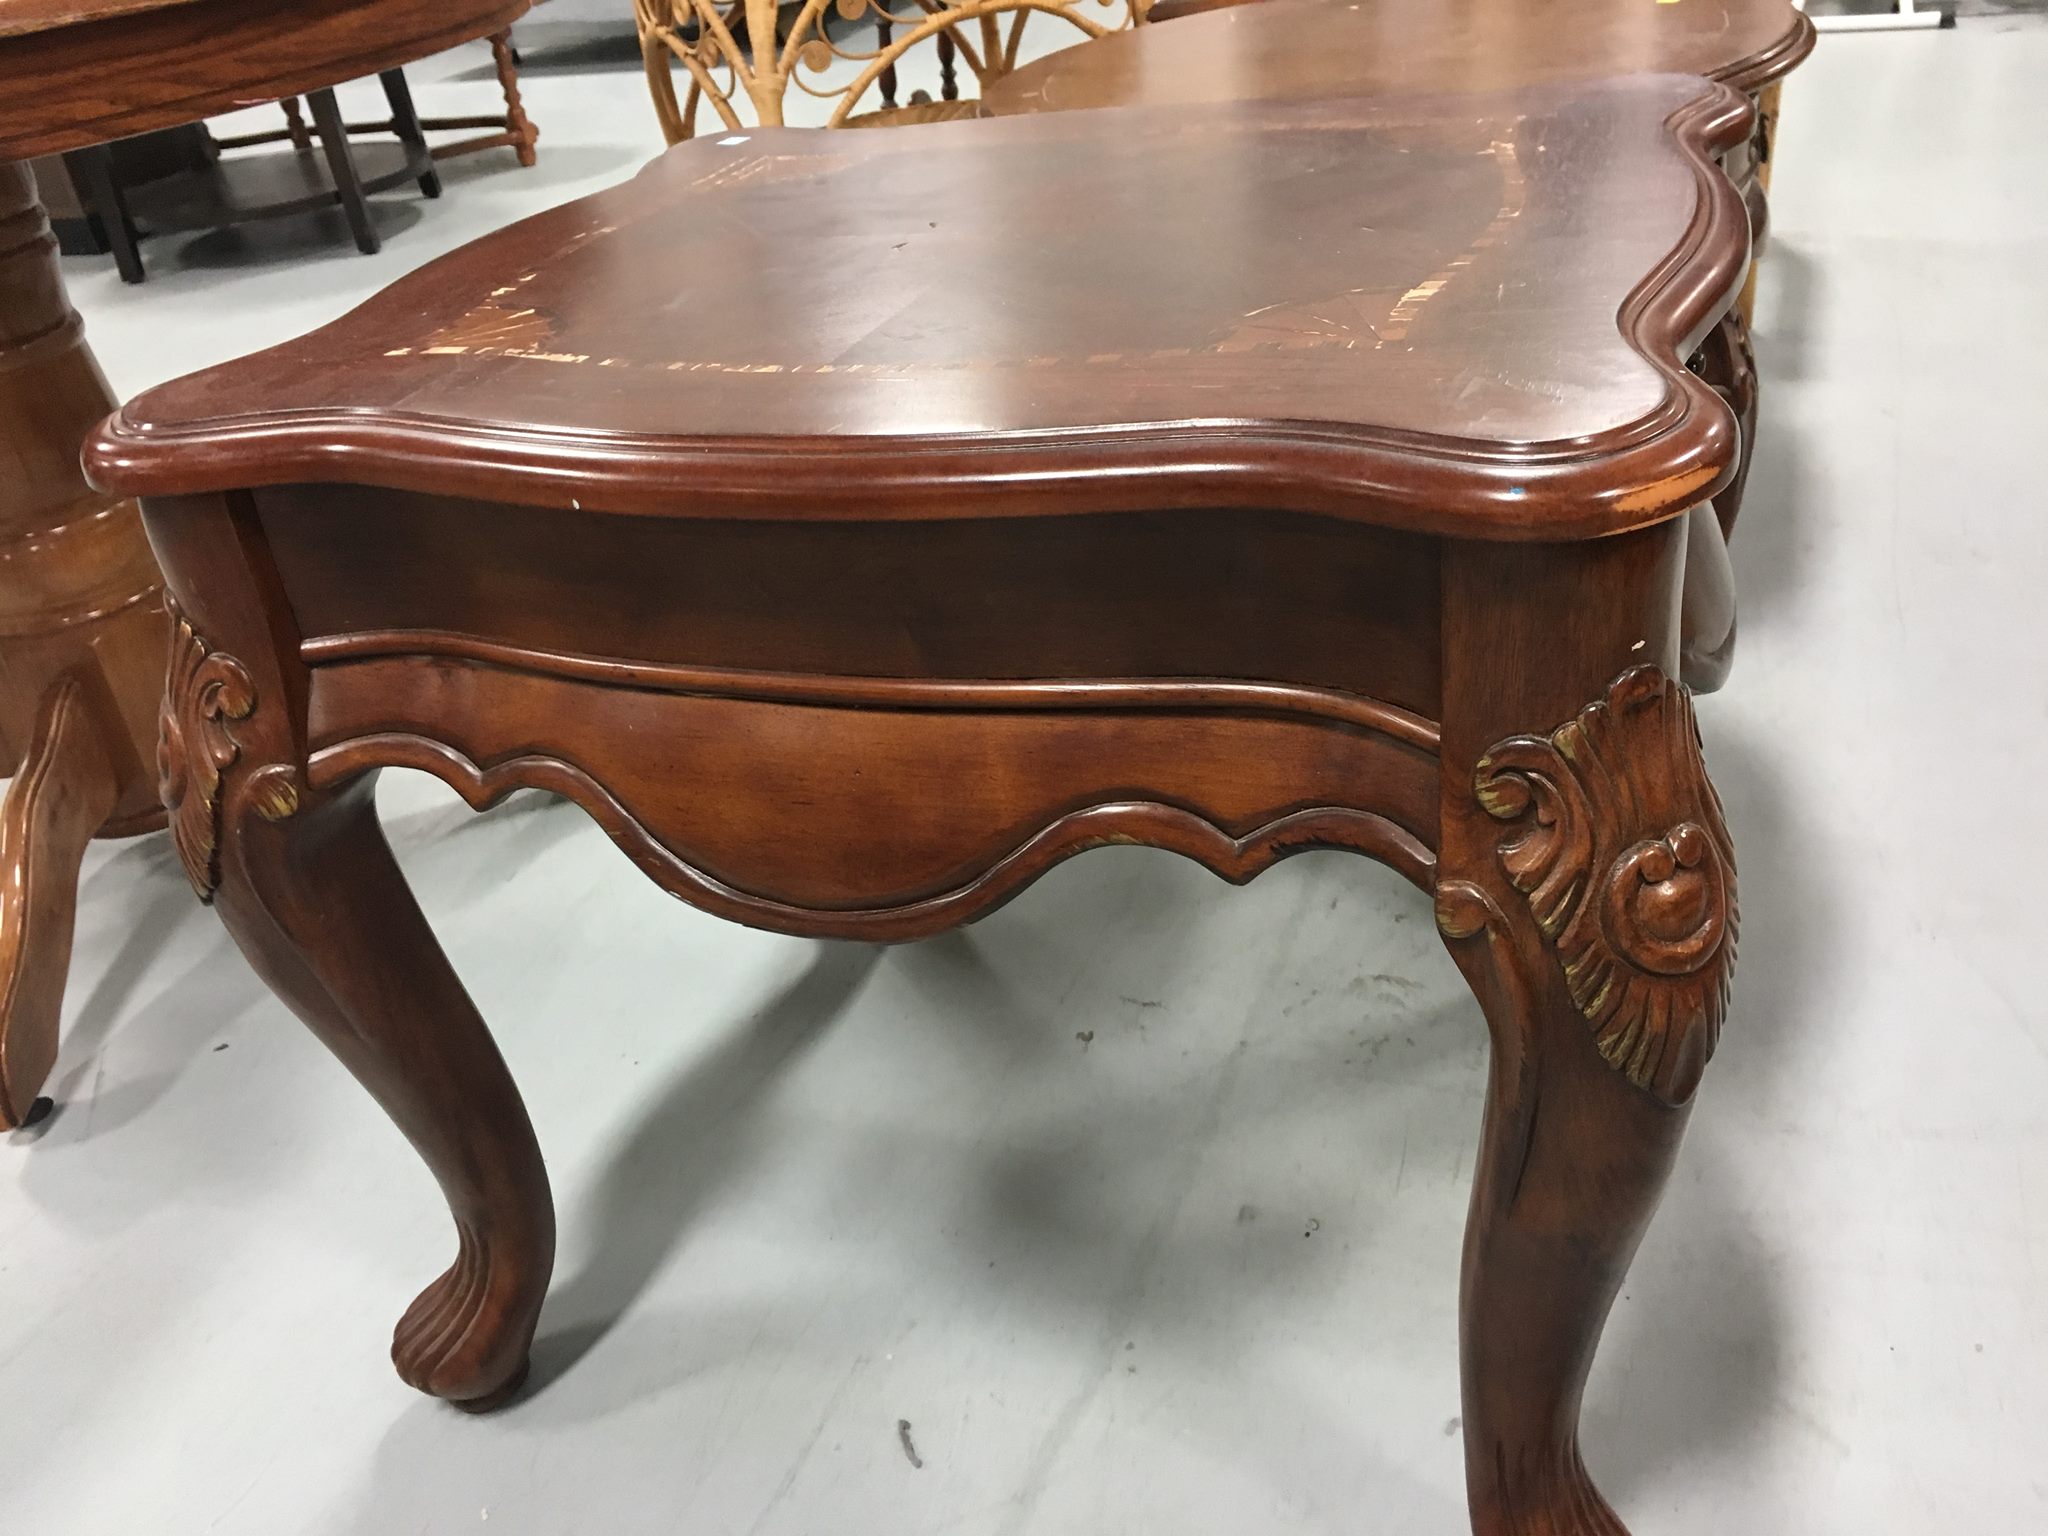 Salvation-army-thrift-coffee-table